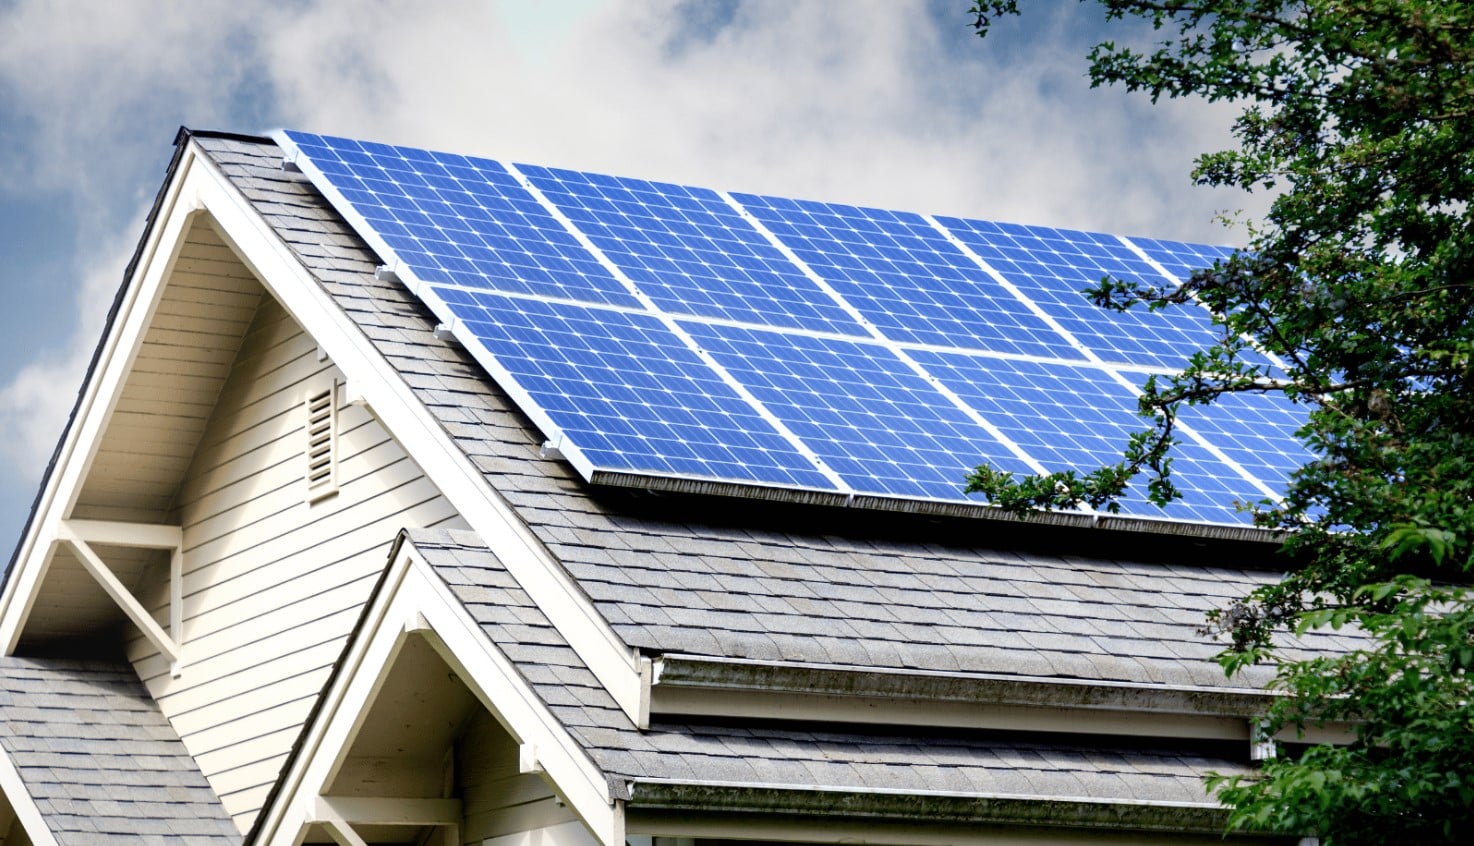 Complete Guide to Installing a 5 kW Photovoltaic Panel Kit for Sustainable Energy